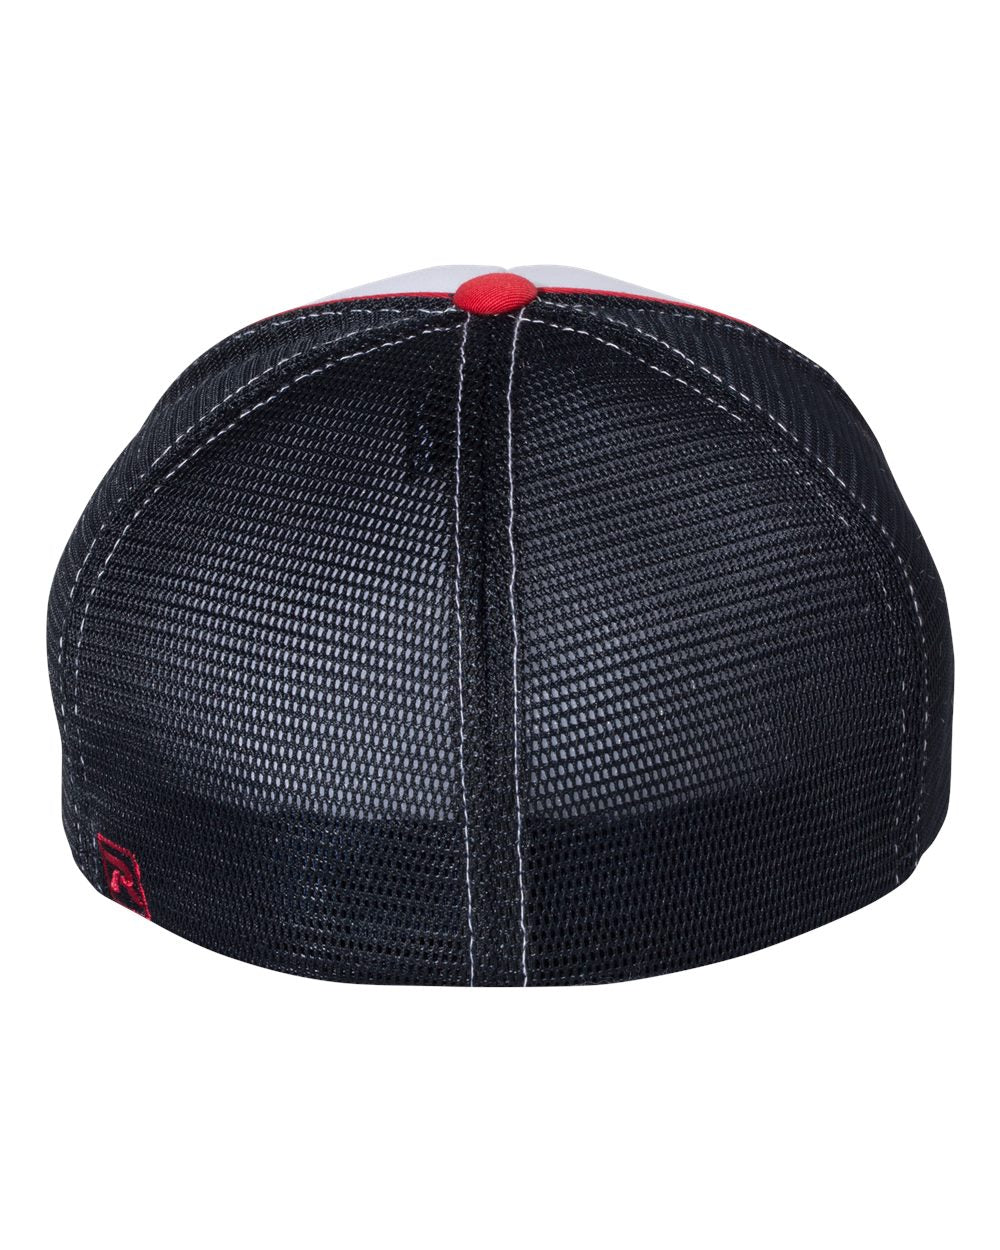 Richardson Fitted Pulse Sportmesh with R-Flex Cap 172 #color_White/ Navy/ Red Tri